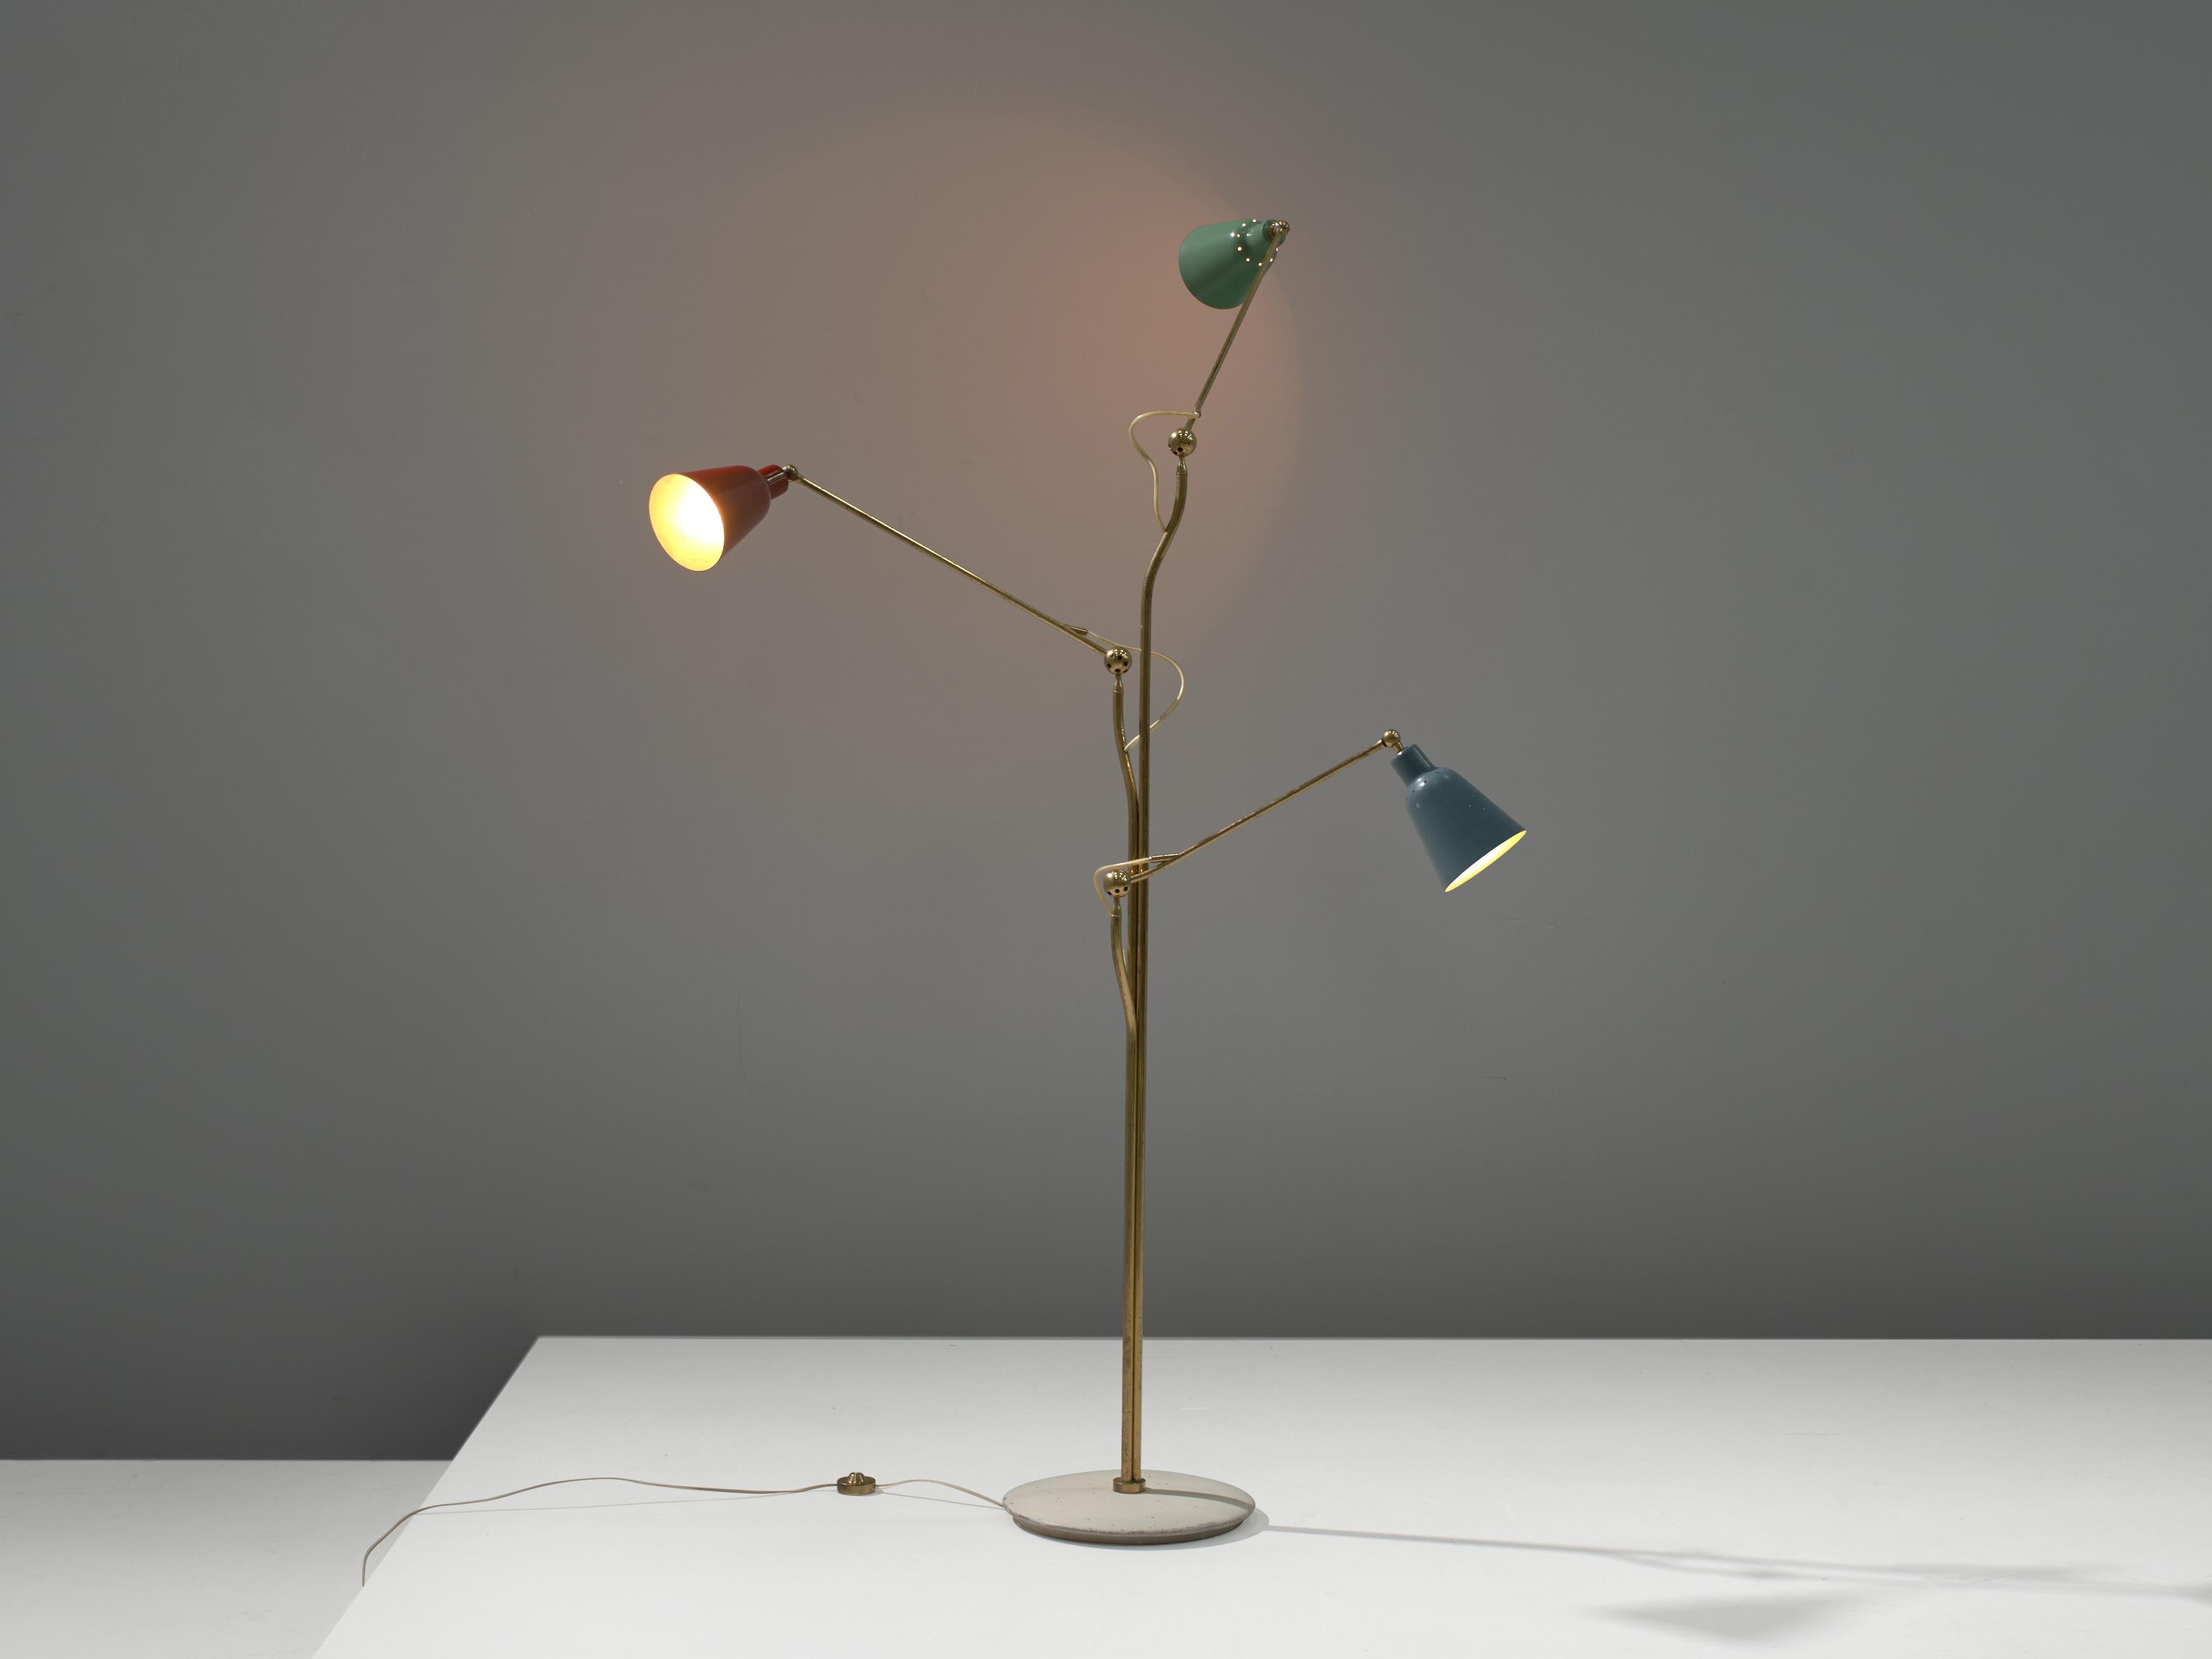 Angelo Lelii for Arredoluce, floor lamp, brass, metal, Italy, 1950s

This iconic floor lamp was designed by Angelo Lelli and manufactured by Arredoluce, Italy in 1950. Duo to its fixtures, the lamp was a symbol of the 1950s. The lamp was designed